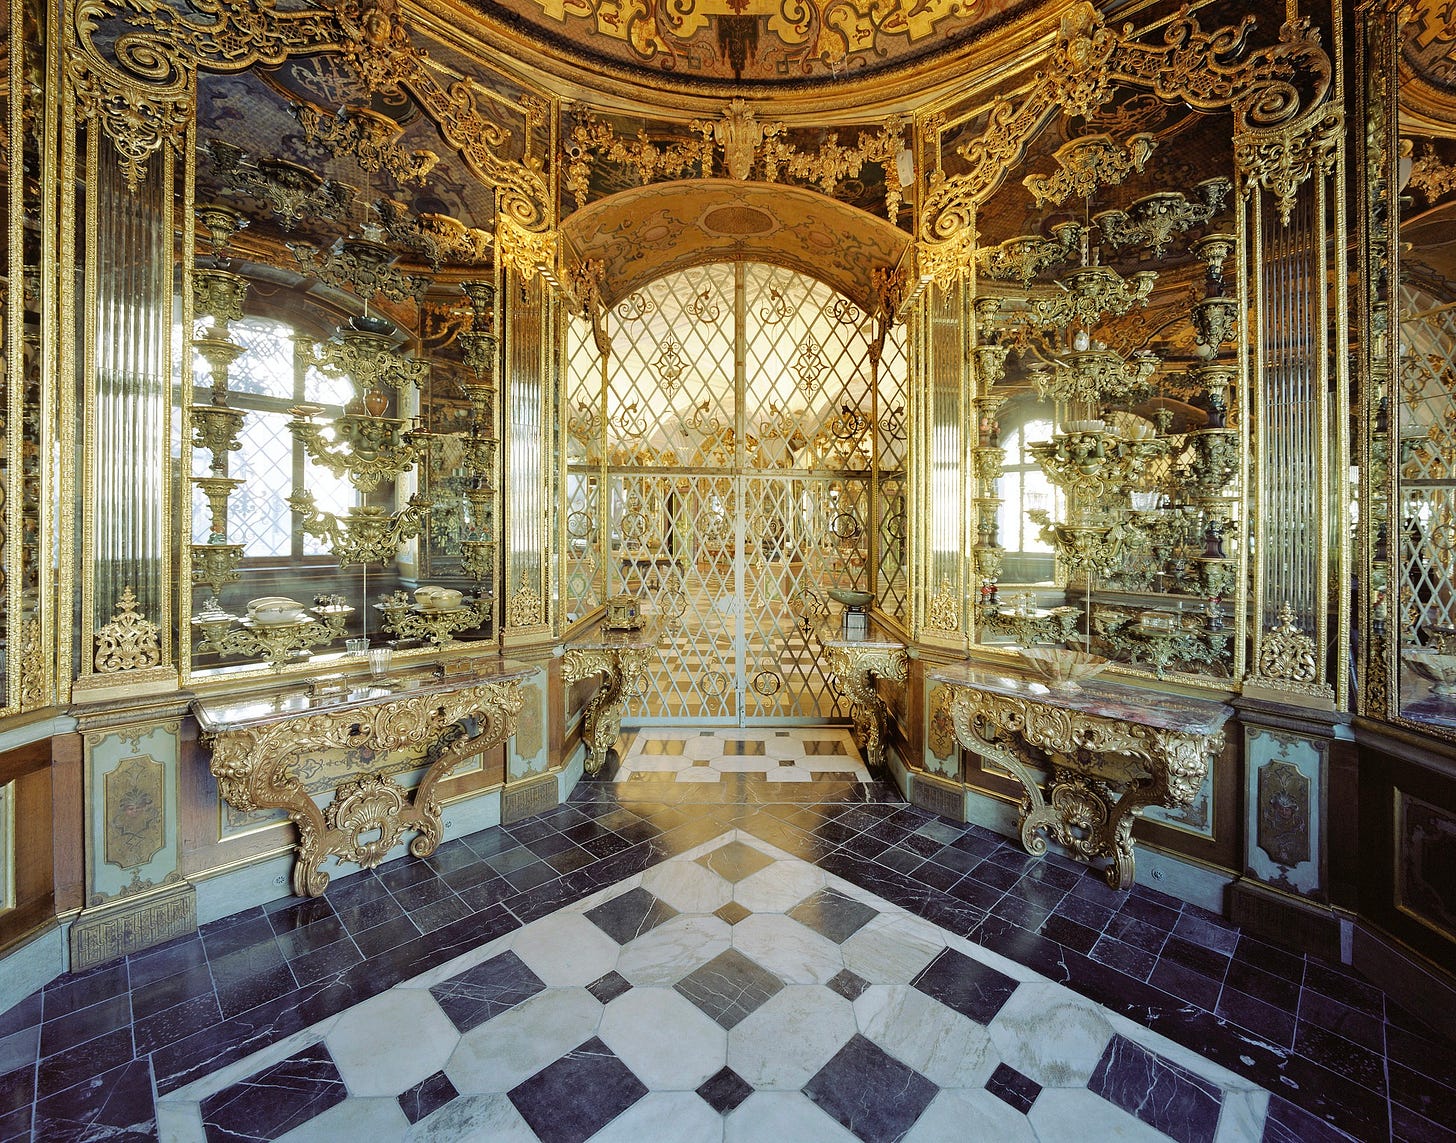 Two mirrored walls and a gated archway covered in mirrors and ornate gold decorations.